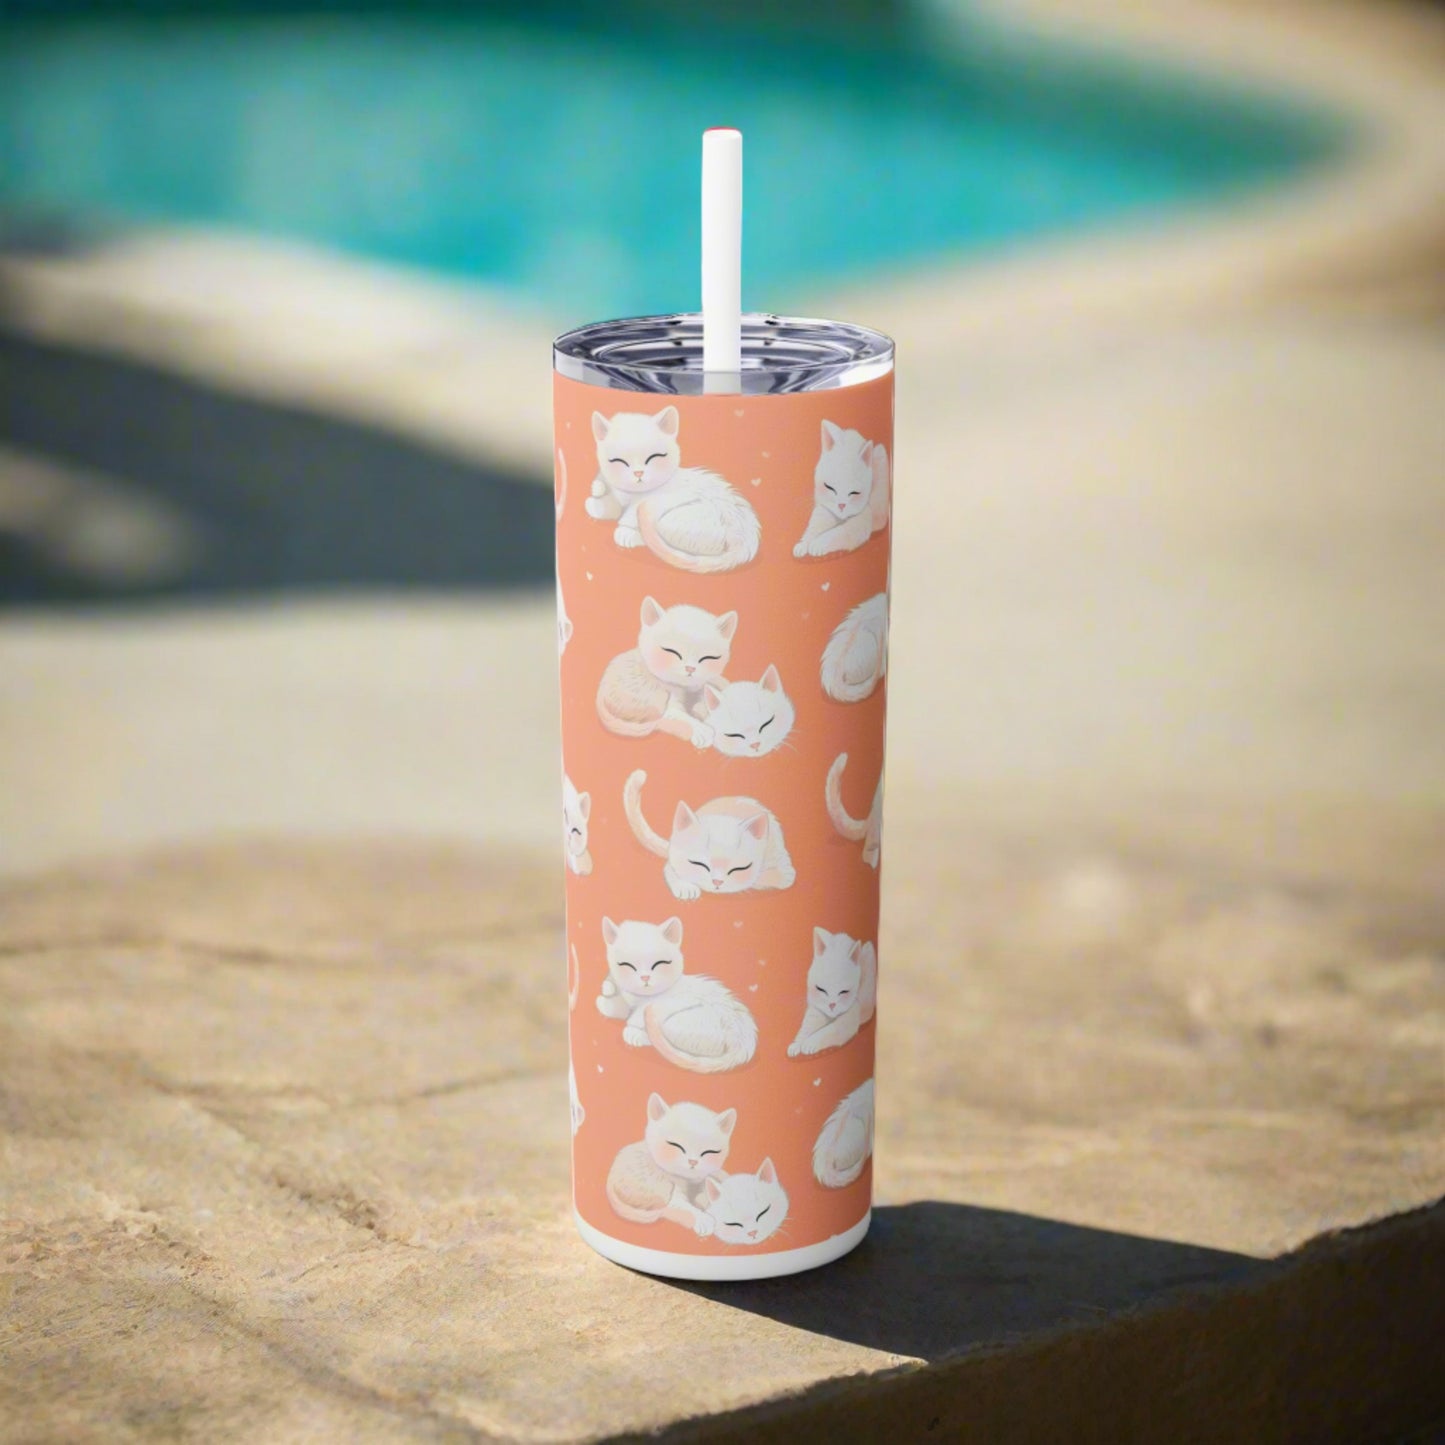 Insulated 20 oz Tumbler with Lid & Straw, Cute Baby Kittens - Double-walled Stainless Steel, Keeps Drinks Hot or Cold